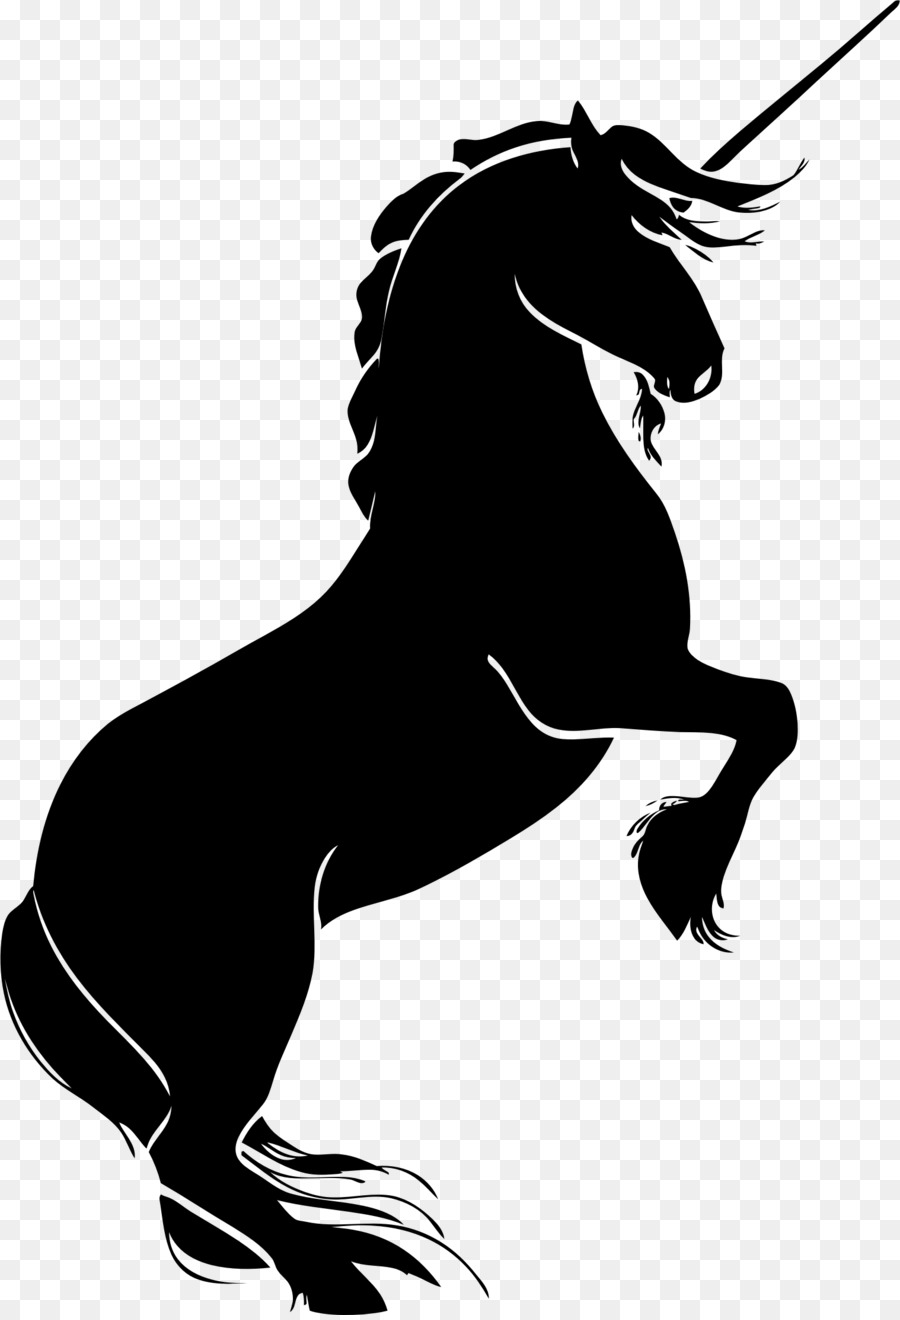 Horse Unicorn Silhouette Rearing Clip art - sillhouette png download - 1518*2218 - Free Transparent  png Download.